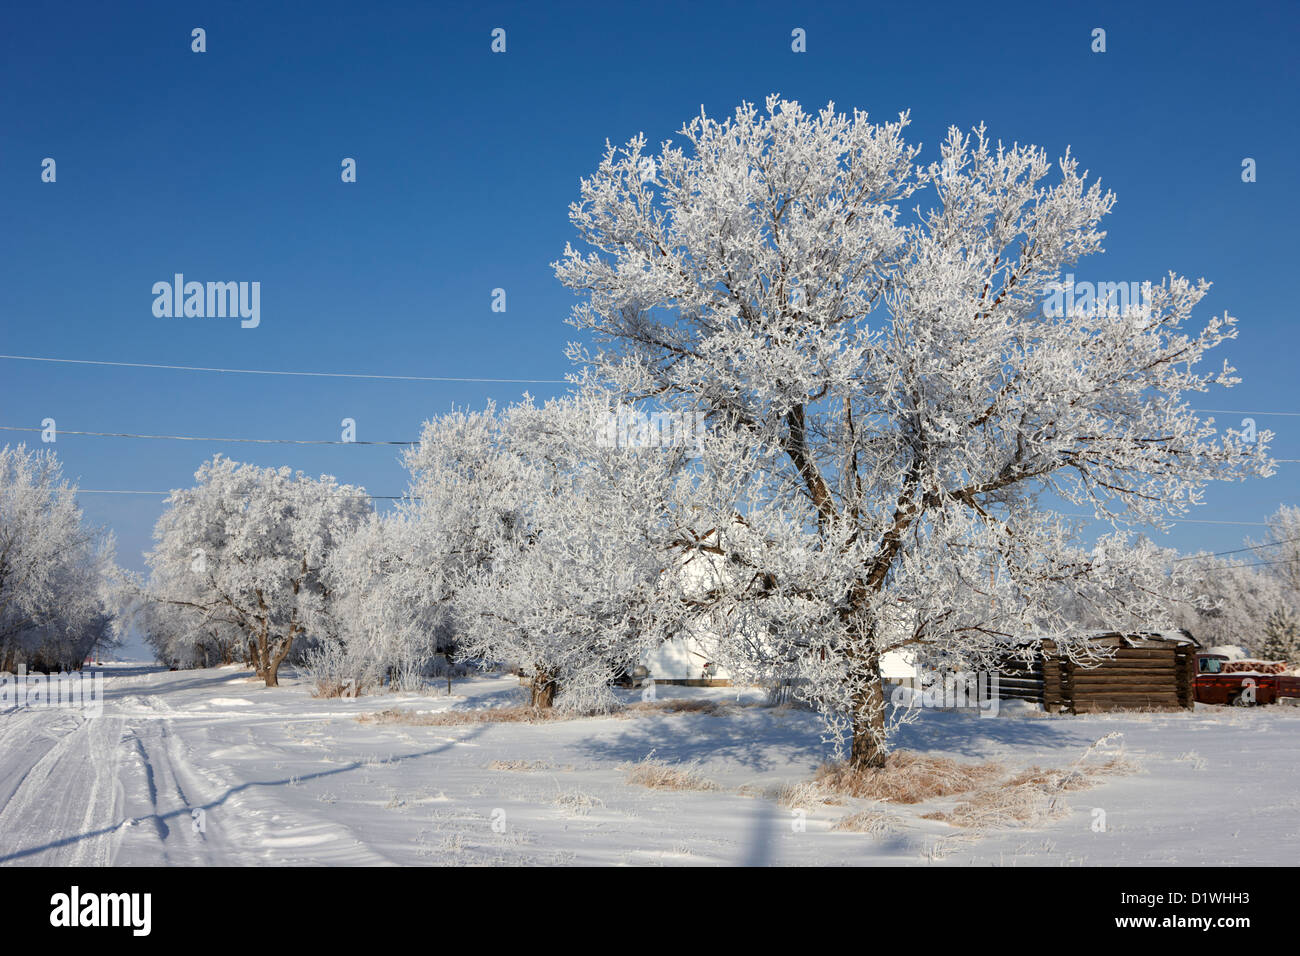 hoar frost on trees in small rural farming community during winter Forget Saskatchewan Canada Stock Photo